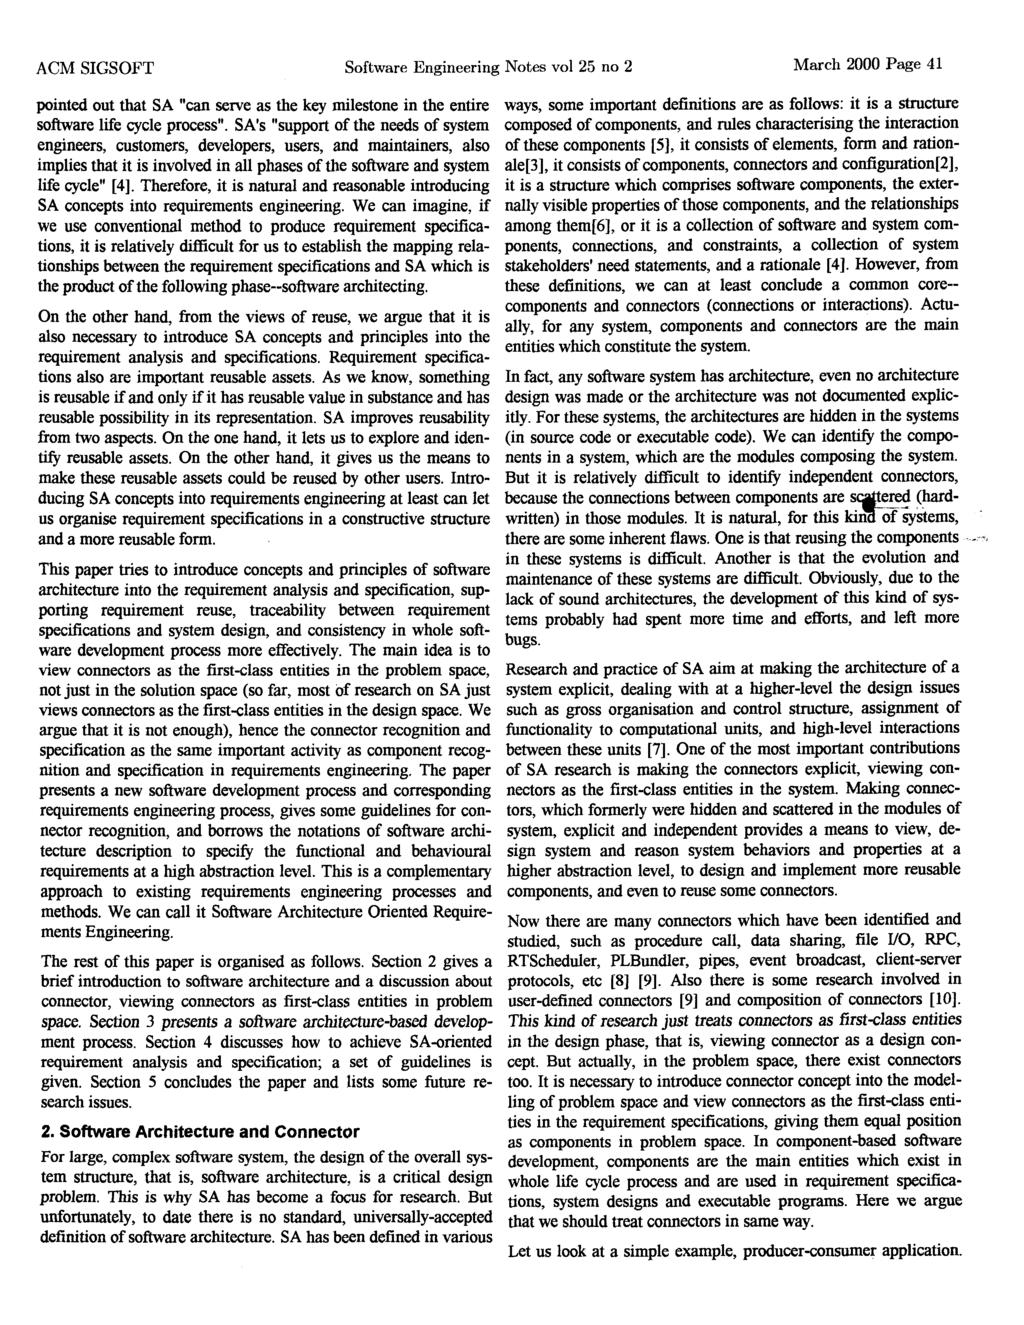 ACM SIGSOFT Software Engineering Notes vol 25 no 2 March 2000 Page 41 pointed out that SA "can serve as the key milestone in the entire software life cycle process".